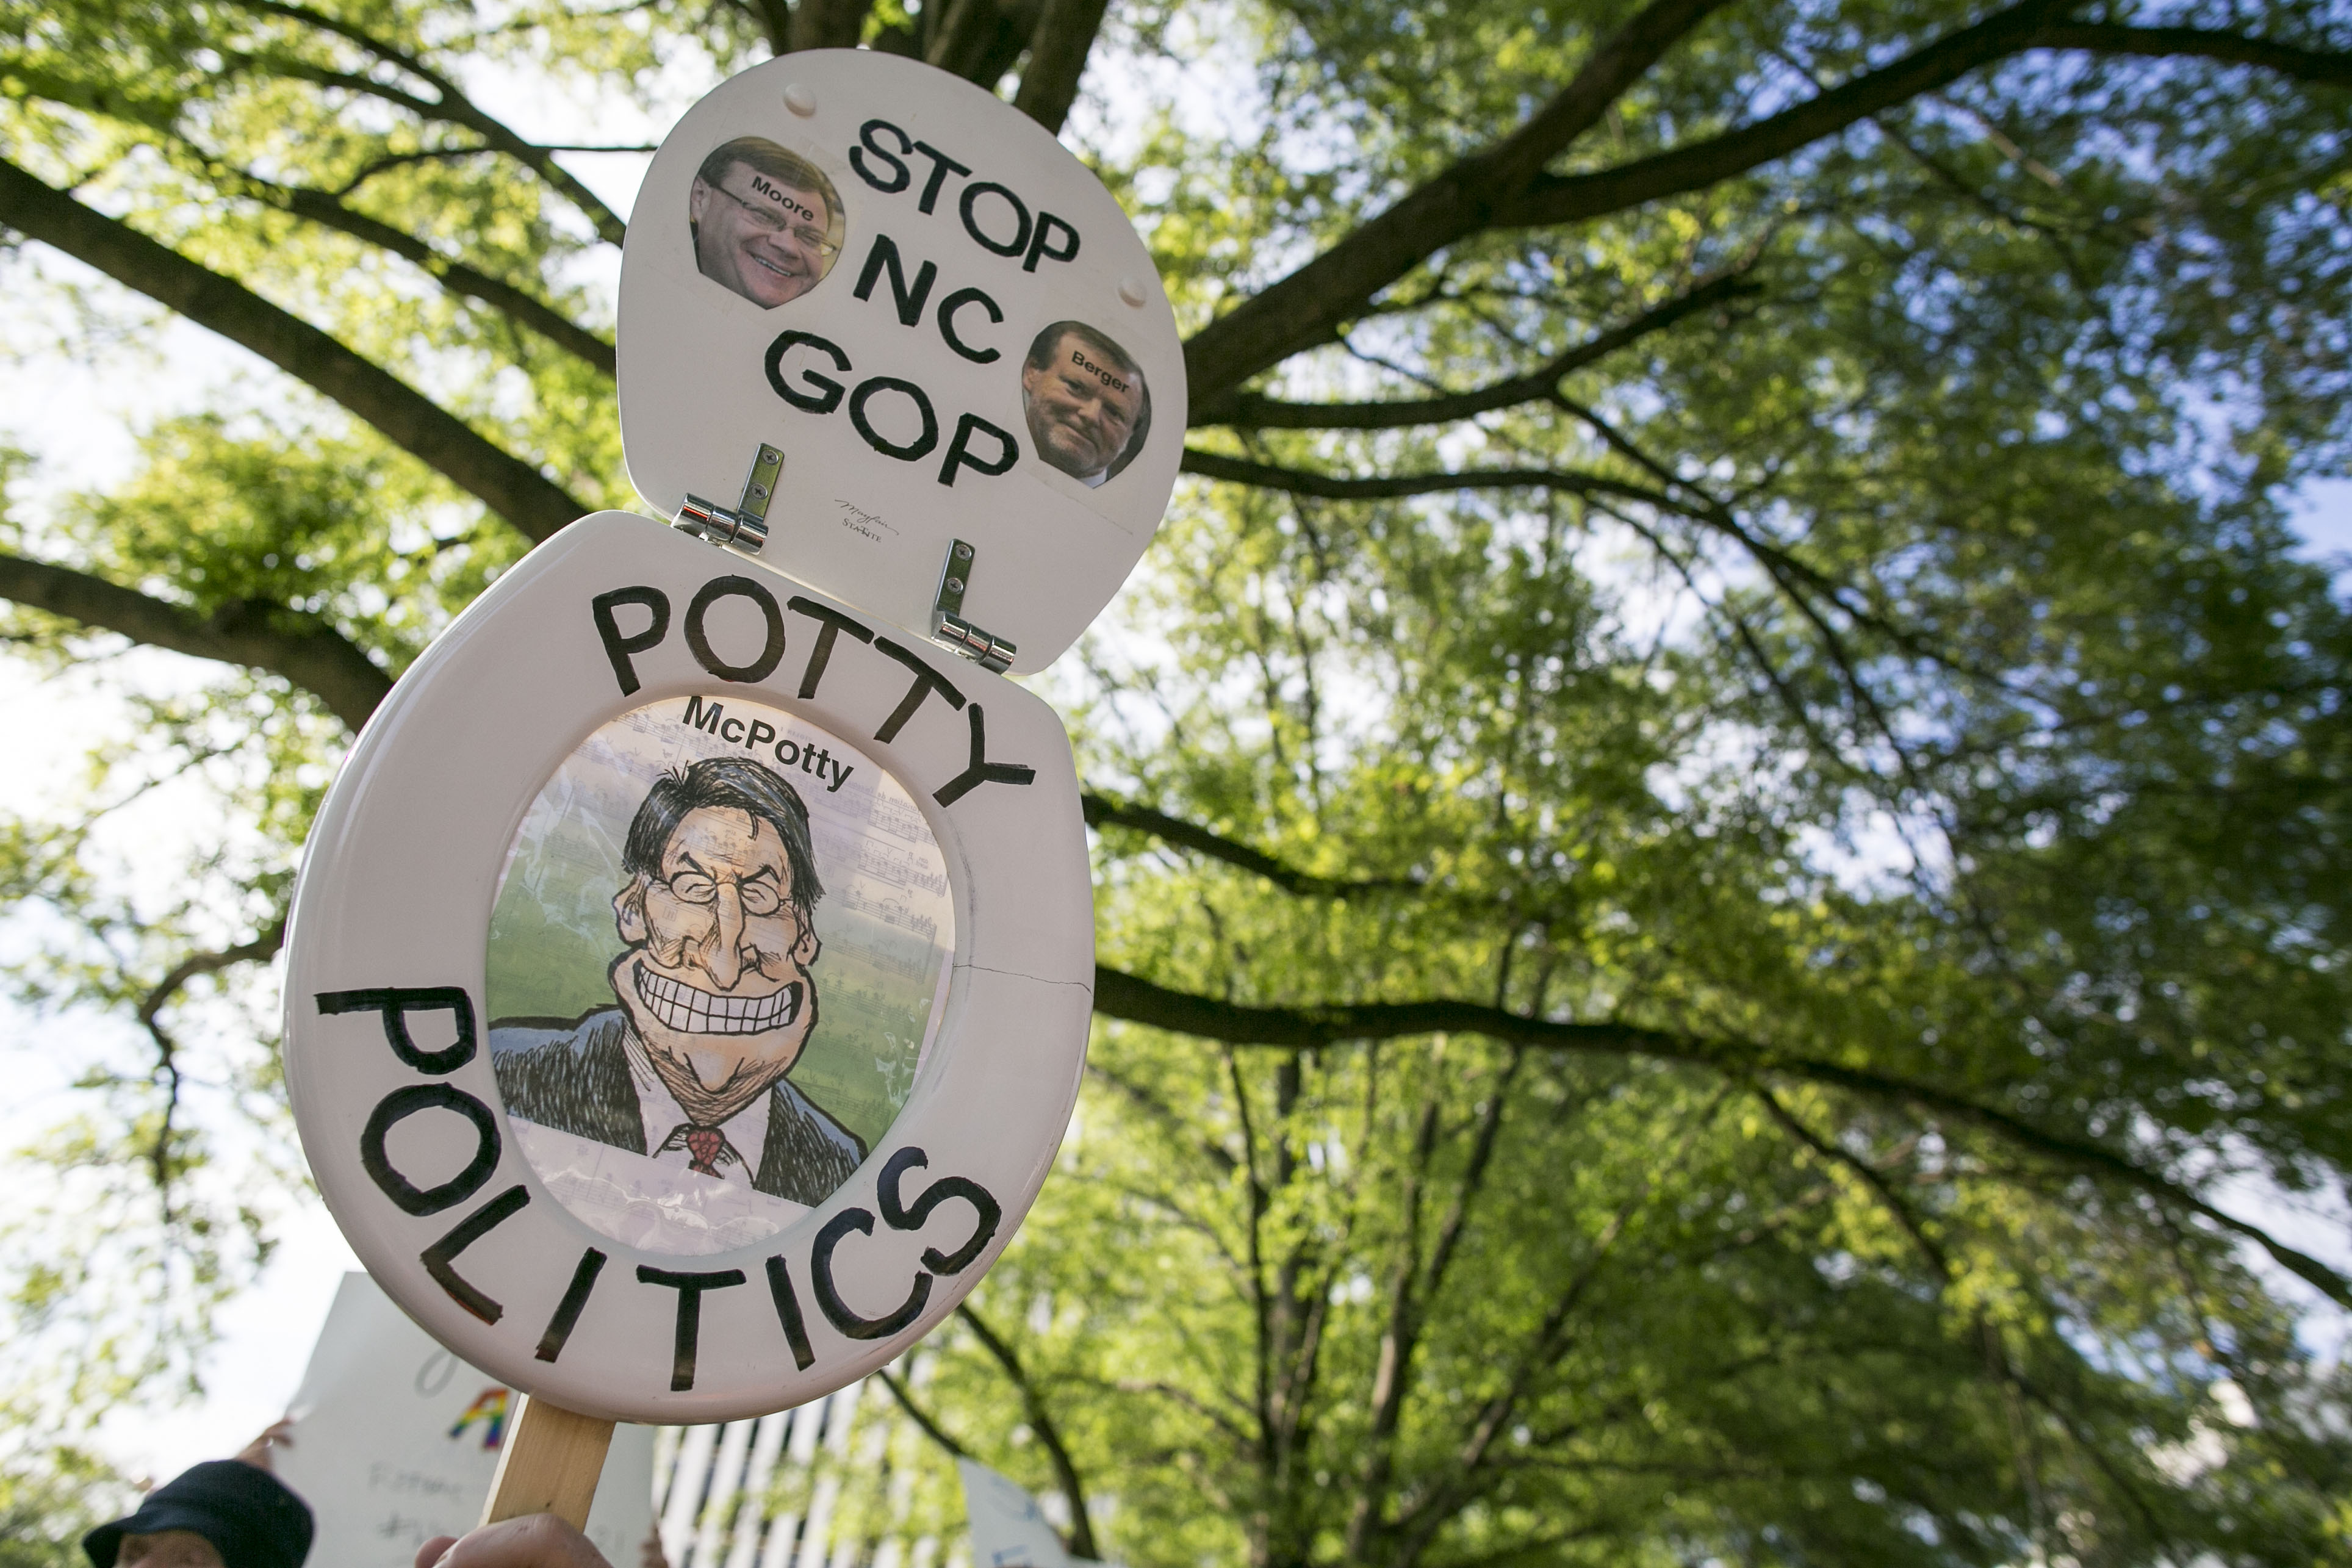 Protestors gather across the street from the North Carolina state legislative building as they voice their concerns over House Bill 2, in Raleigh, N.C., Monday, May 16, 2016. (Al Drago—CQ-Roll Call/AP)